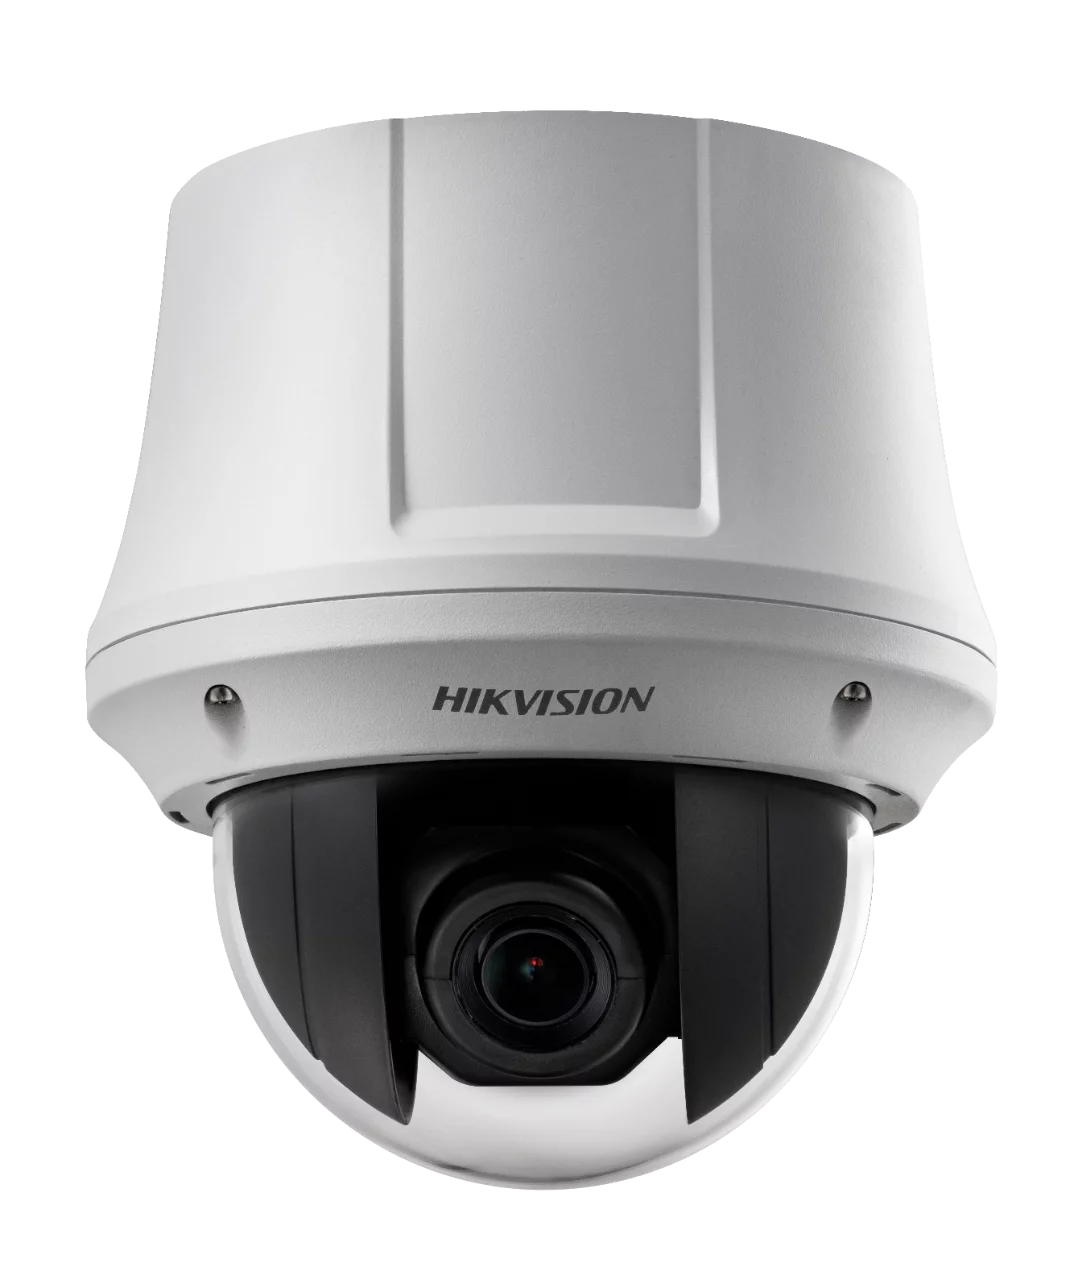 Hikvision 4-inch 4 MP 25X Powered by DarkFighter Network Speed Dome Camera DS-2DE4425W-DE3(S6)